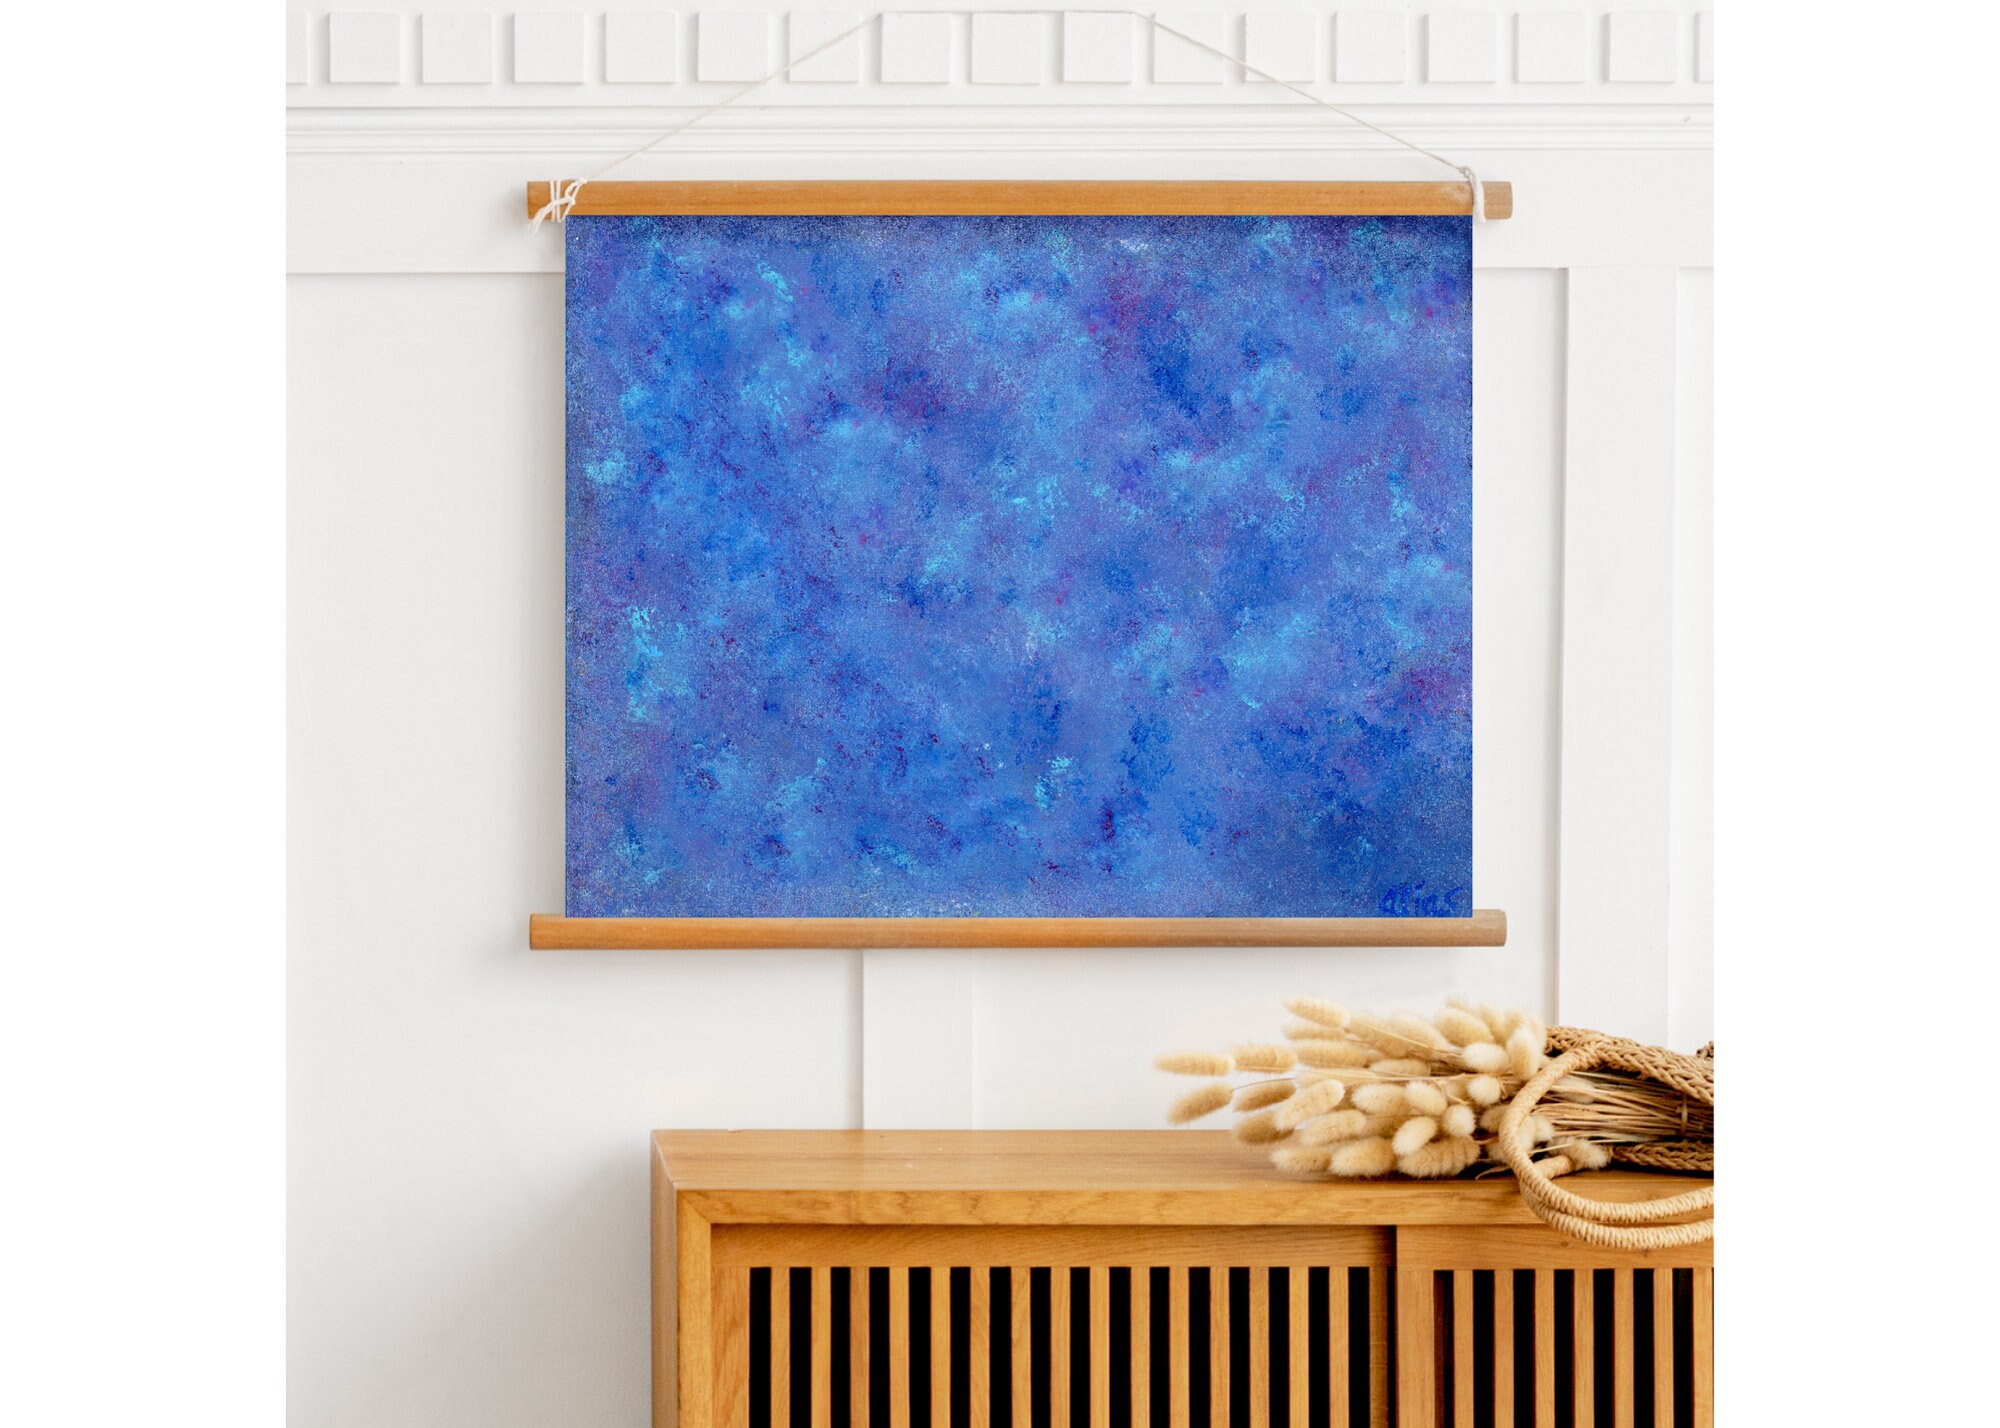 Medium Sized Acrylic 18 X 24 Canvas Painting, Shades of Blue Wall Art,  Perfect for Living Room or Office, Original Home Decor 